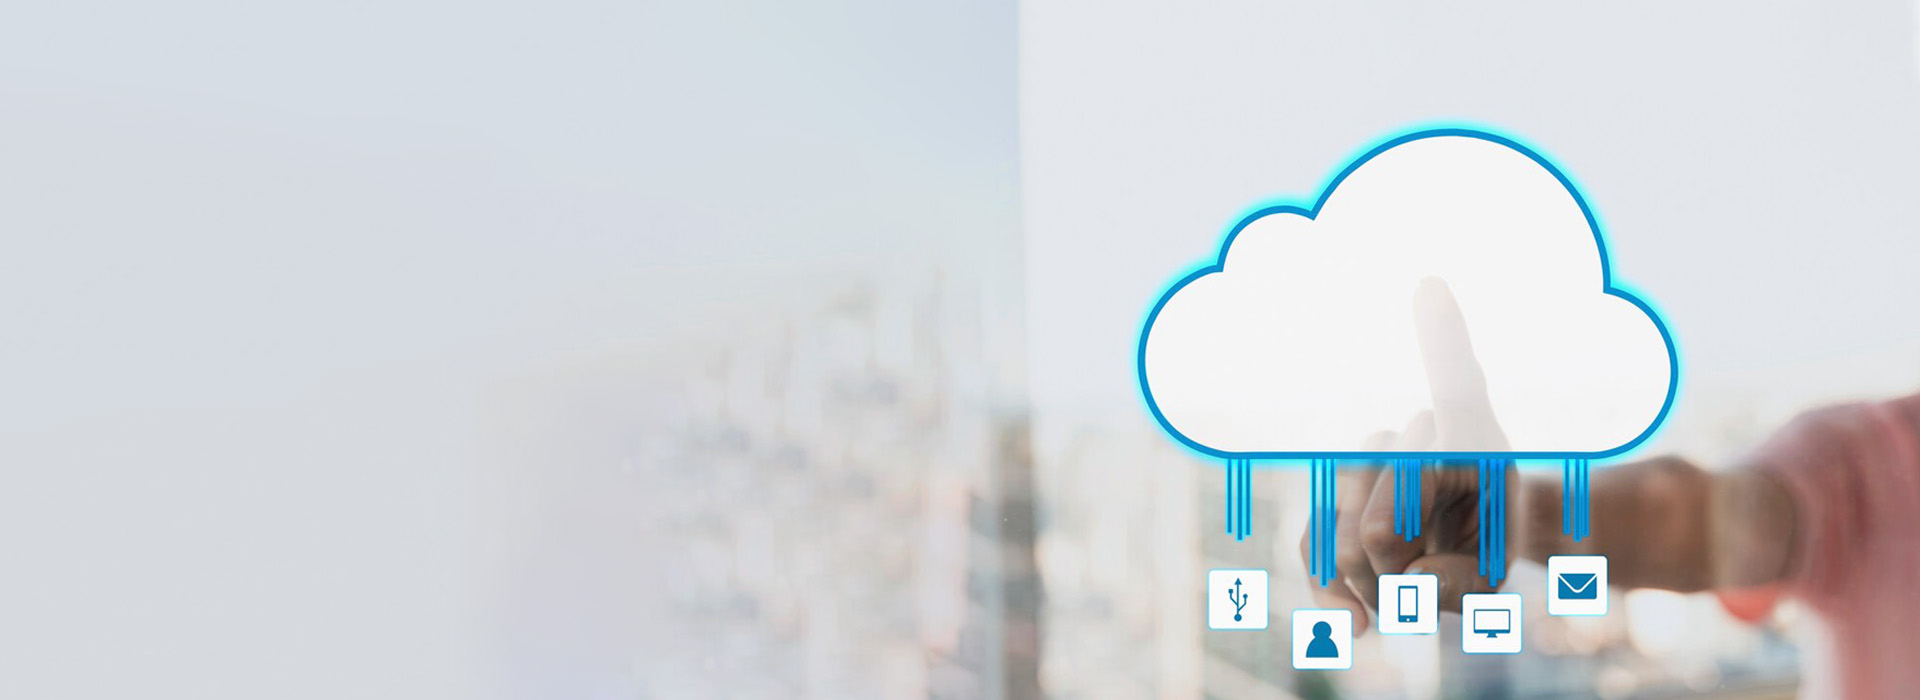 hire dedicated cloud services